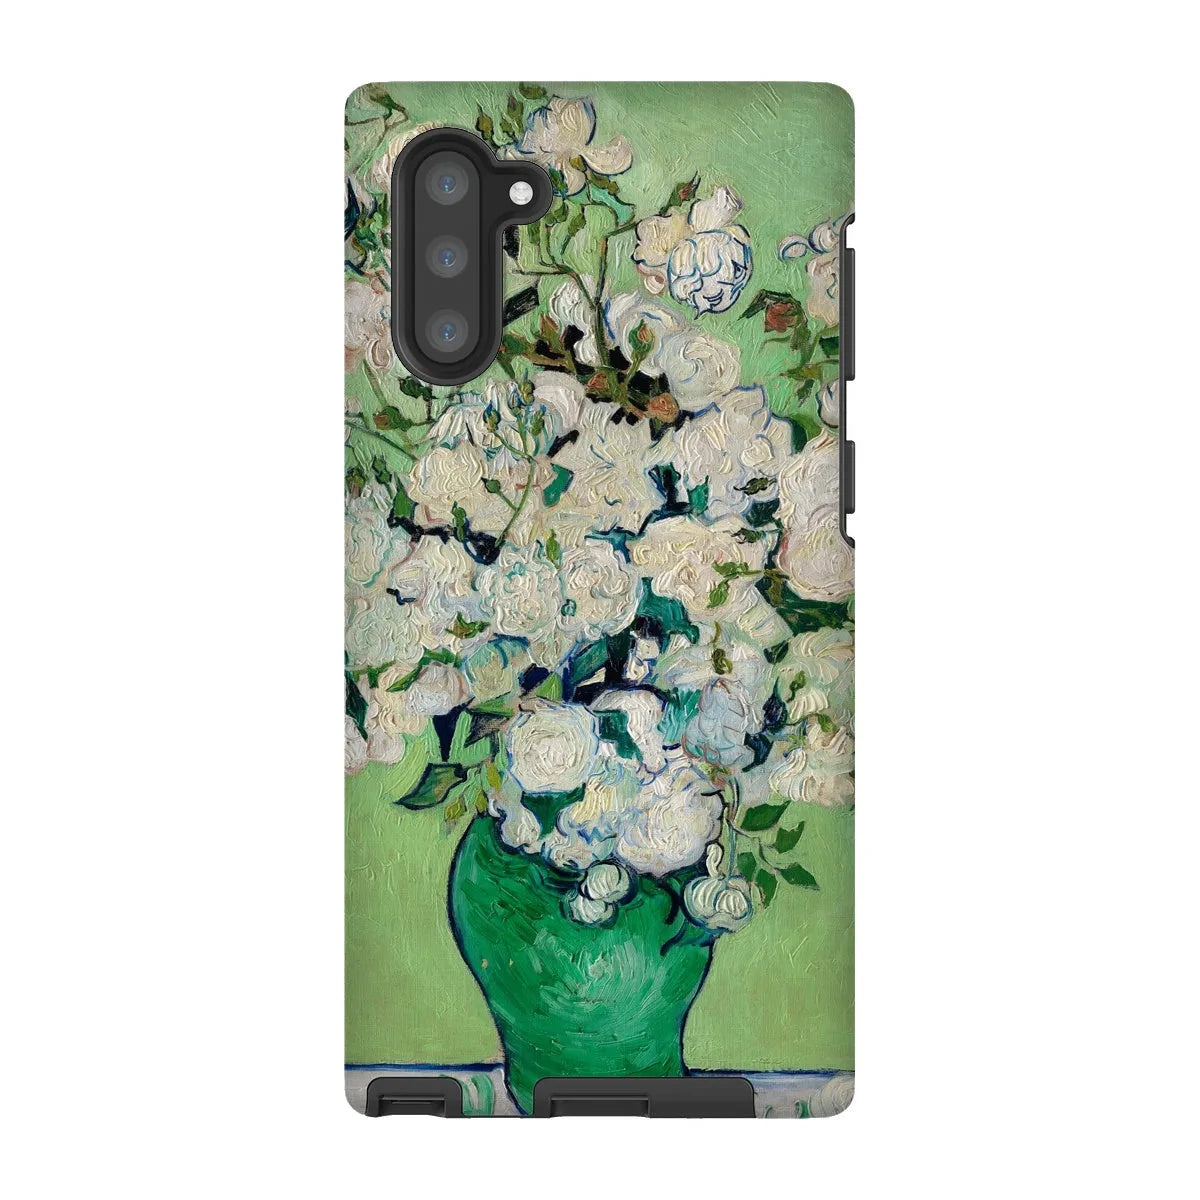 Roses - Post-impressionist Phone Case - Vincent Van Gogh - Samsung Galaxy Note 10 / Matte - Mobile Phone Cases